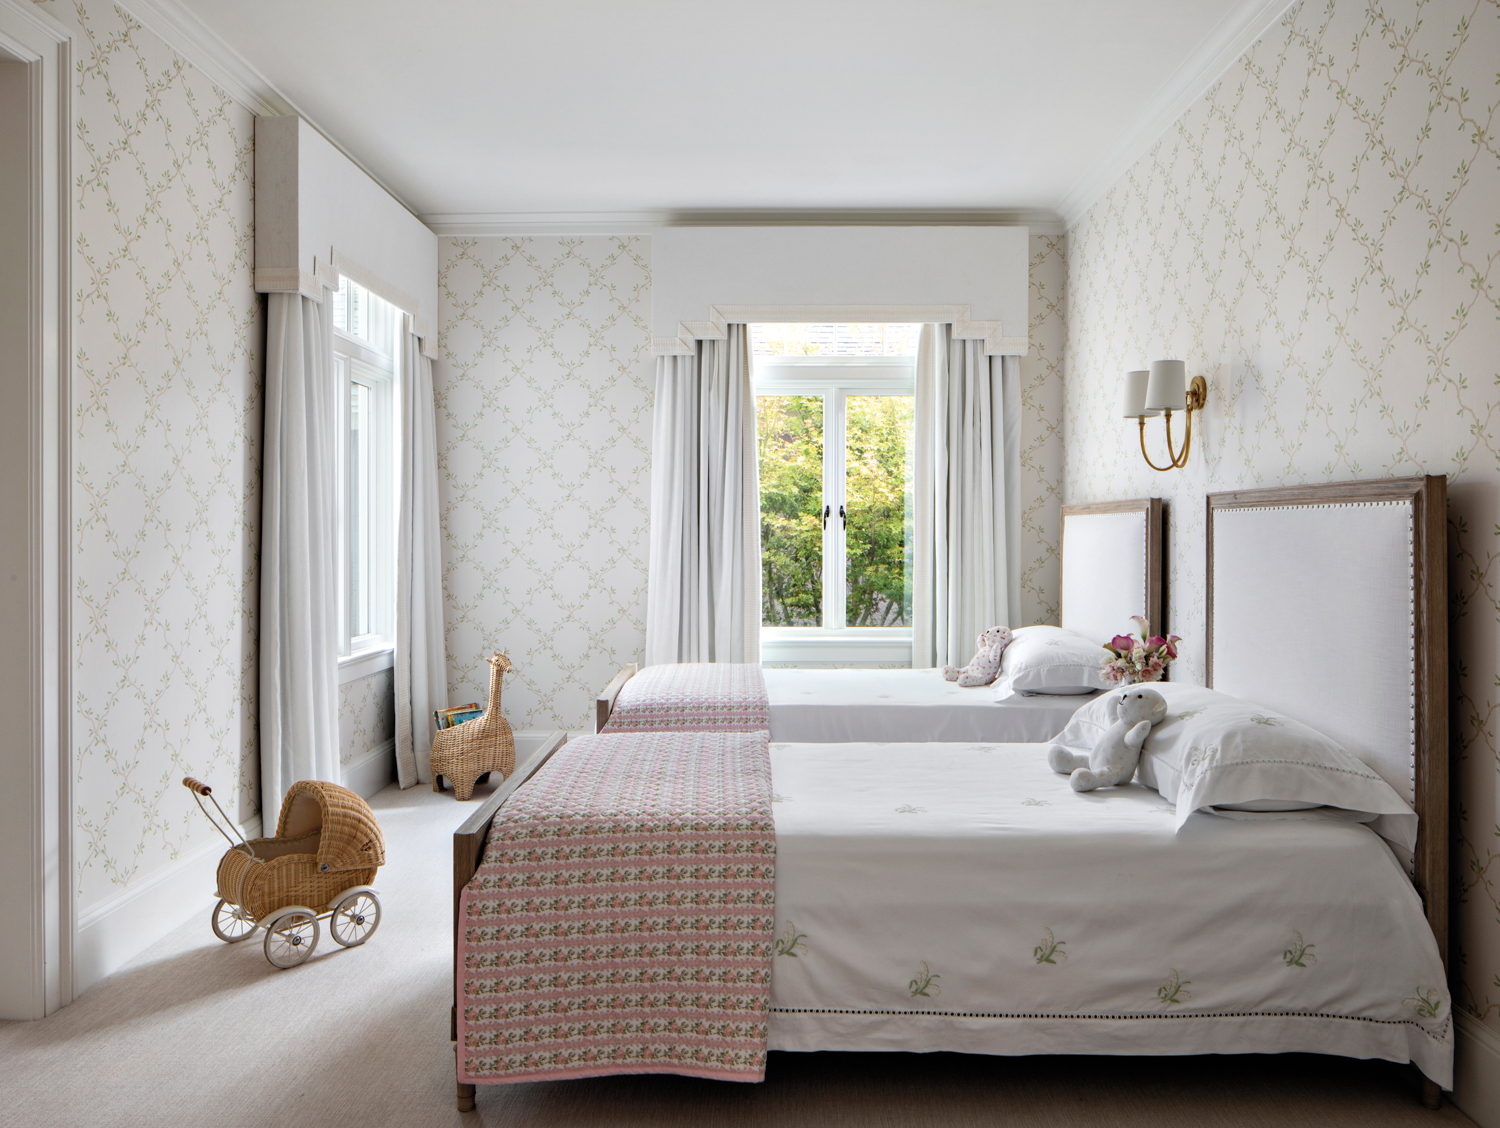 another bedroom with patterned wallpaper...